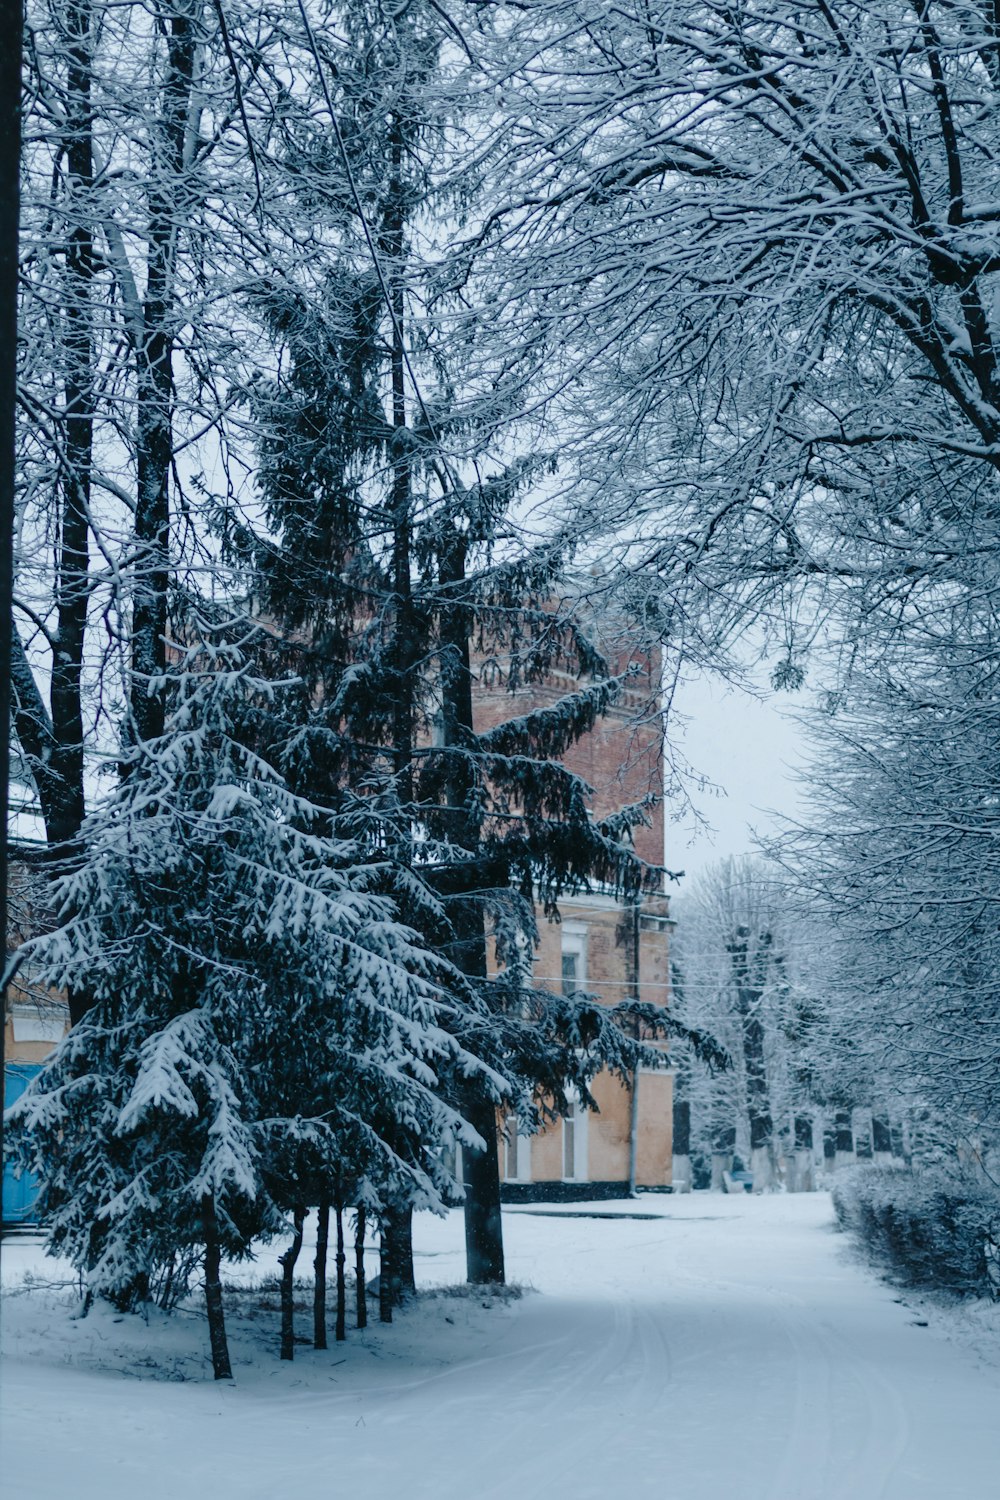 a snow covered street with trees and a building in the background